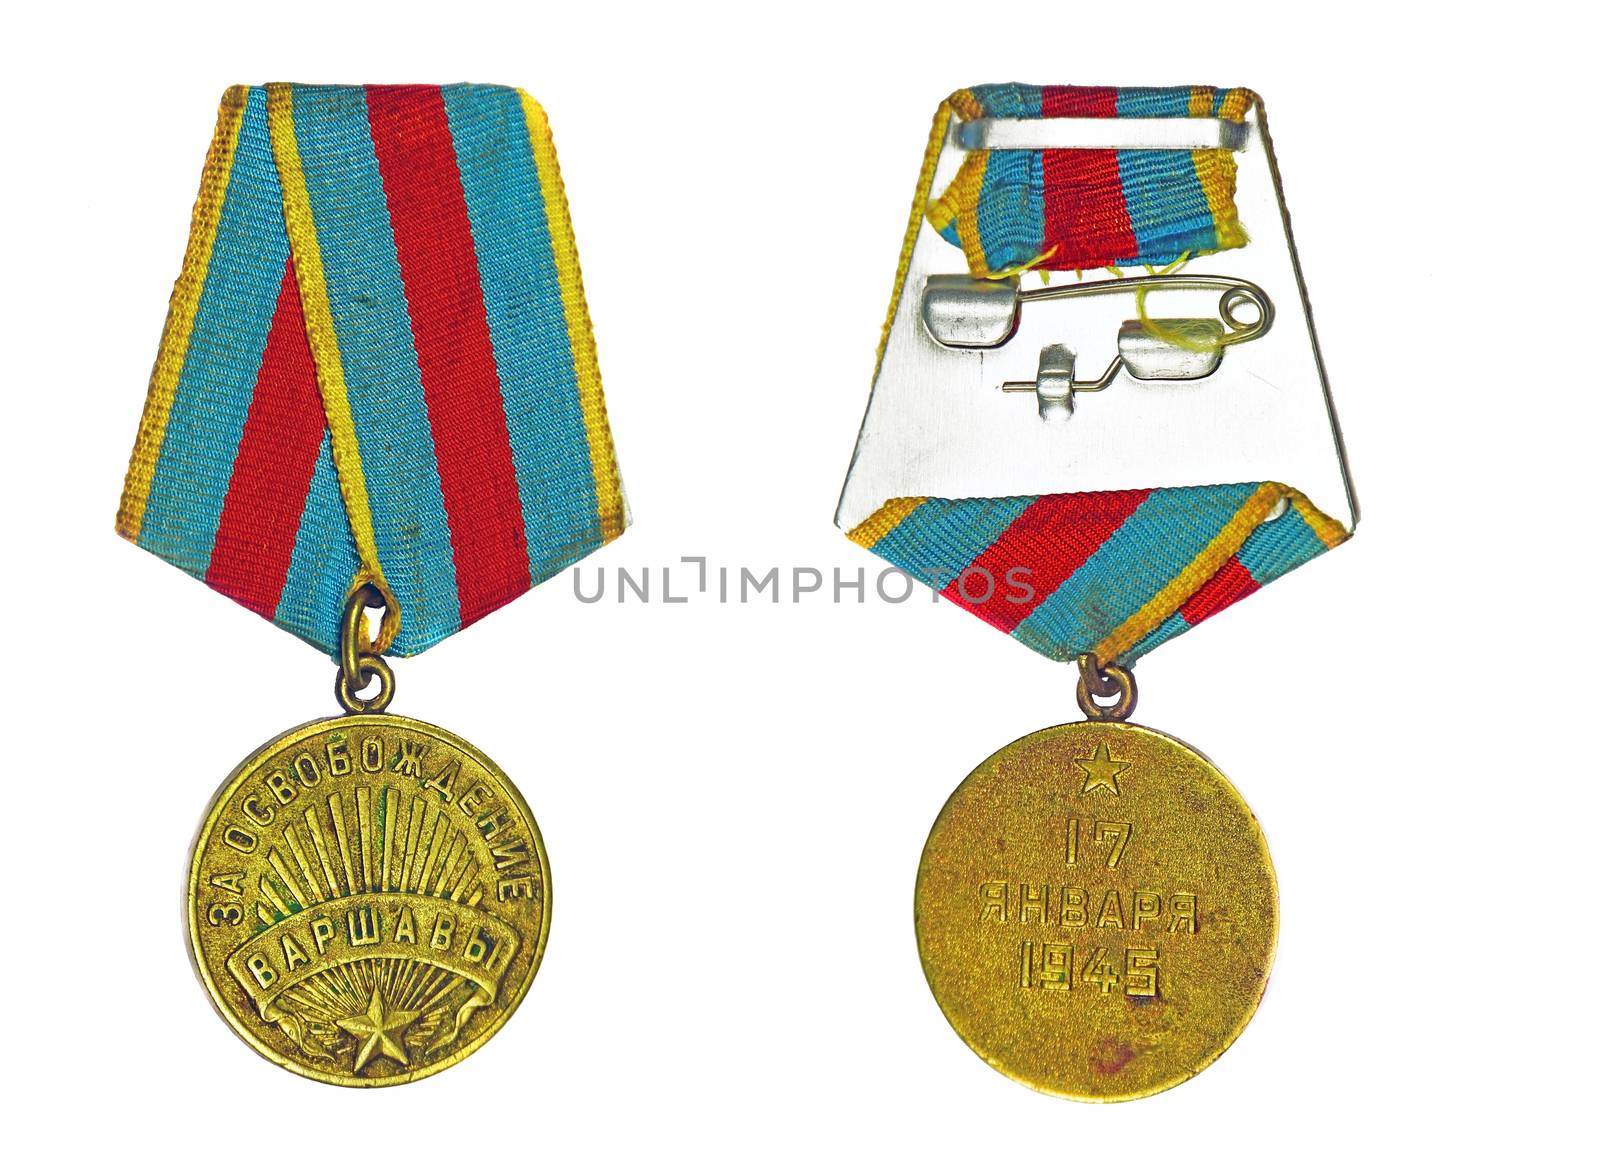 Medal "For the Liberation of Warsaw" (with the reverse side) on a white background